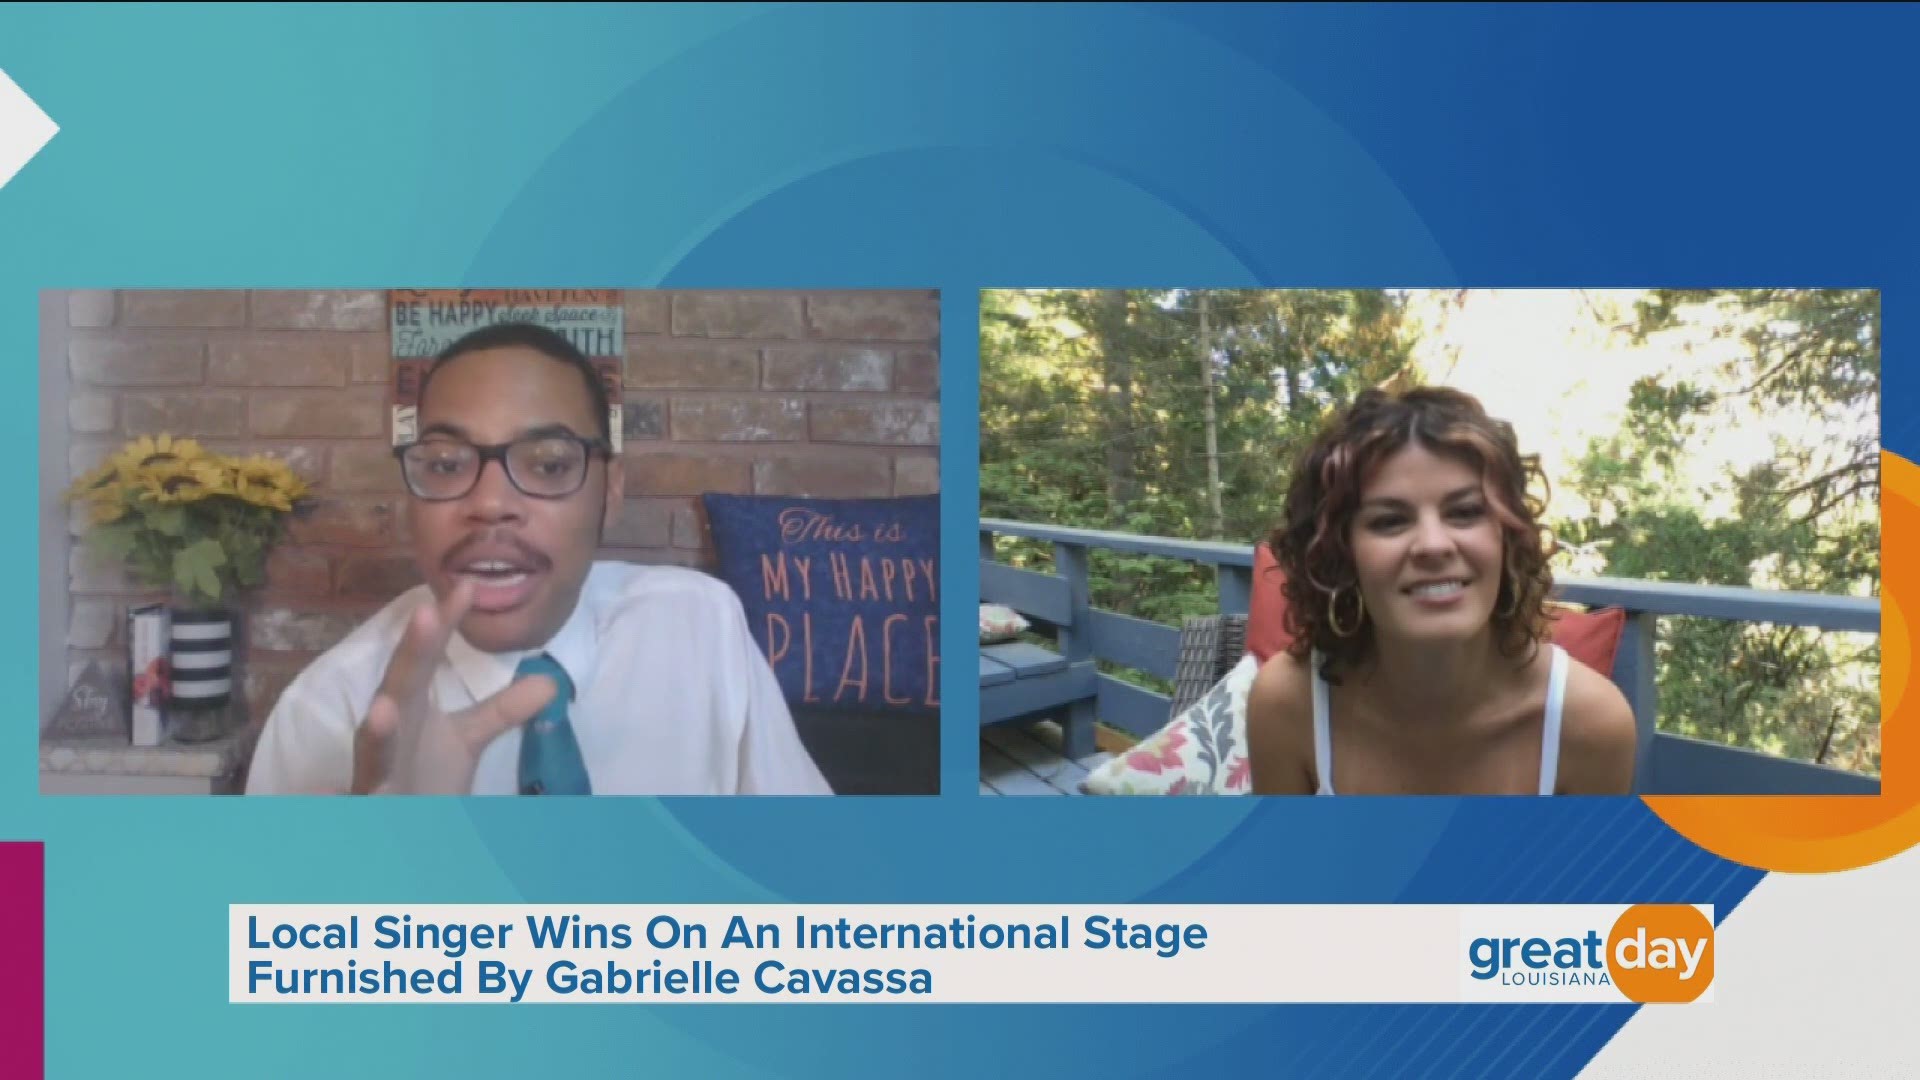 Singer Gabrielle Cavassa discussed her recent win at the "International Sarah Vaughan Jazz Vocal Competition" and performed.